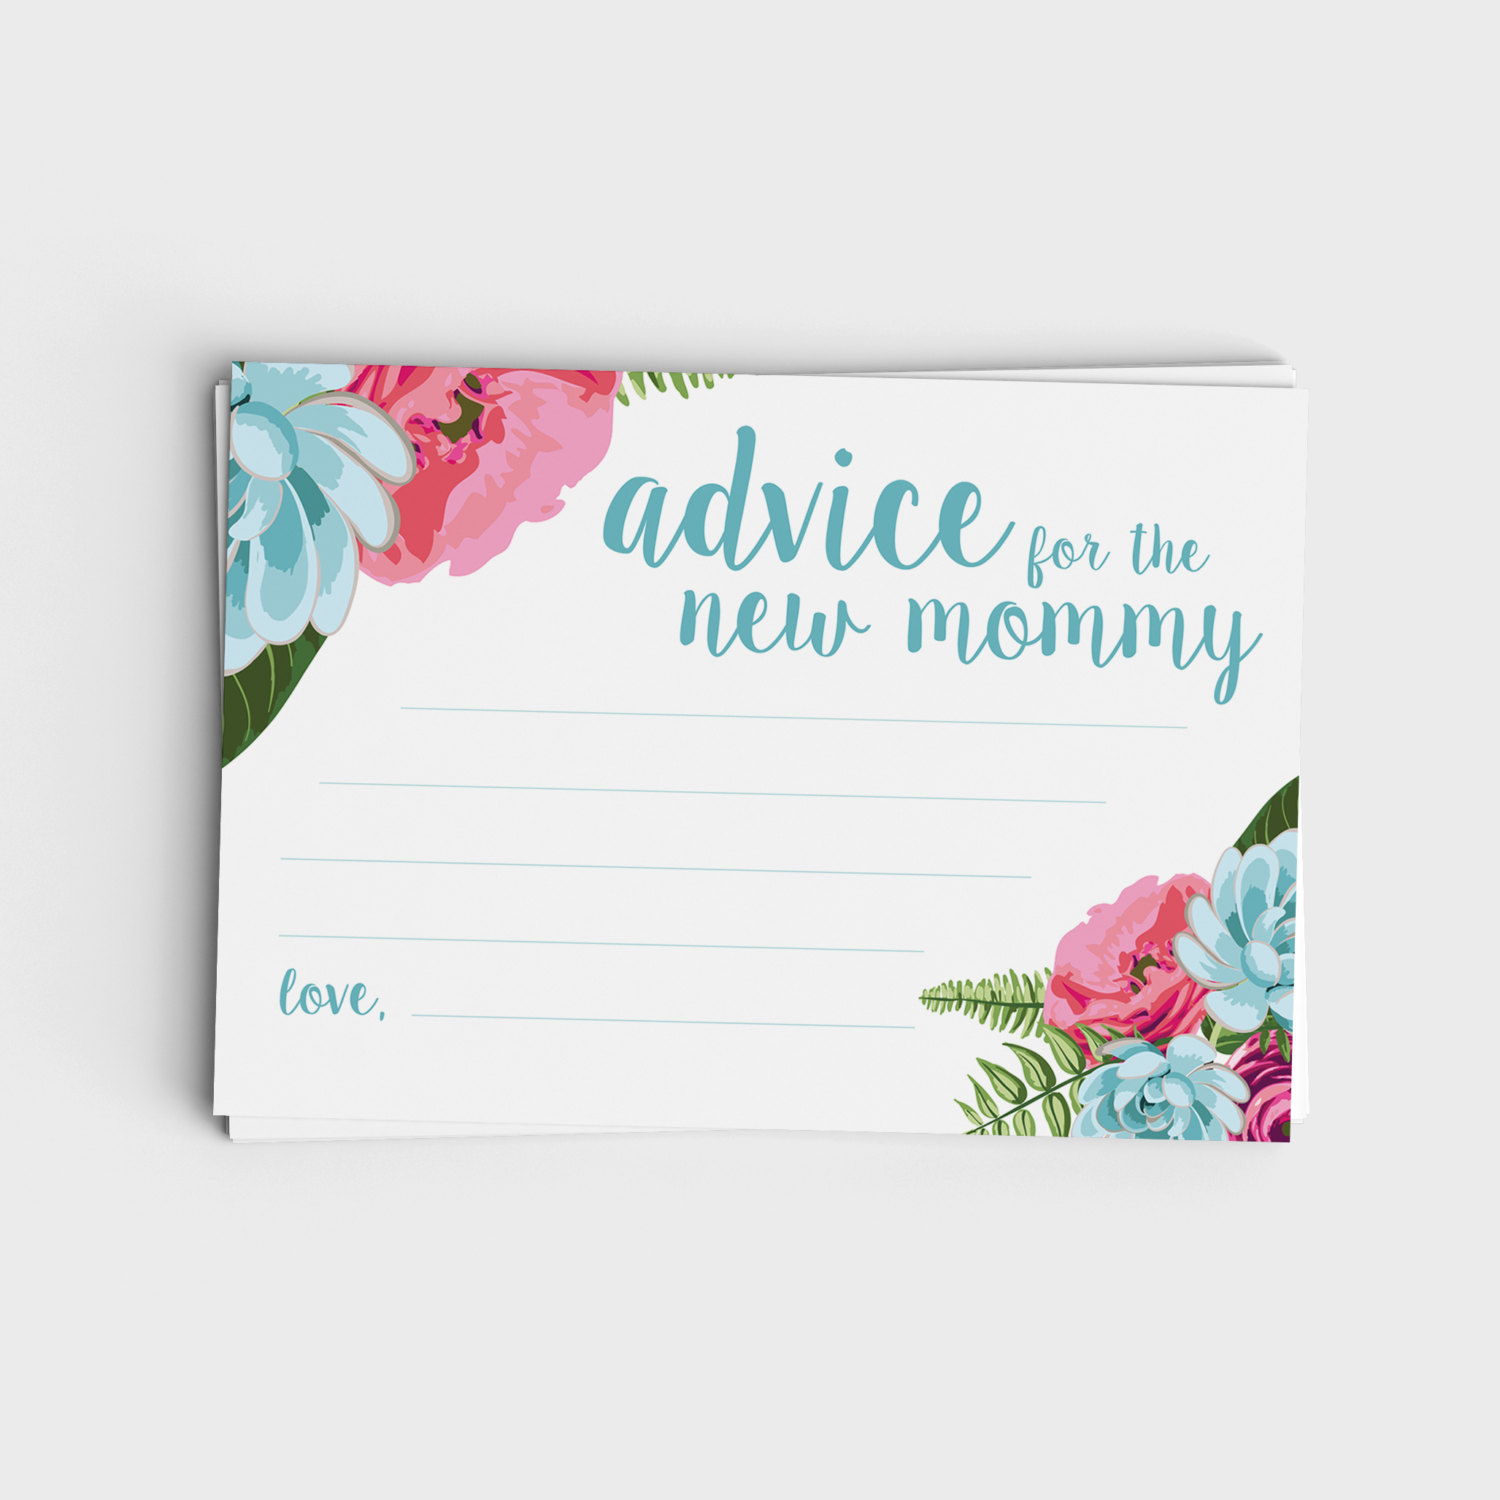 Advice for New Mommy - Pink Floral & Blue Floral